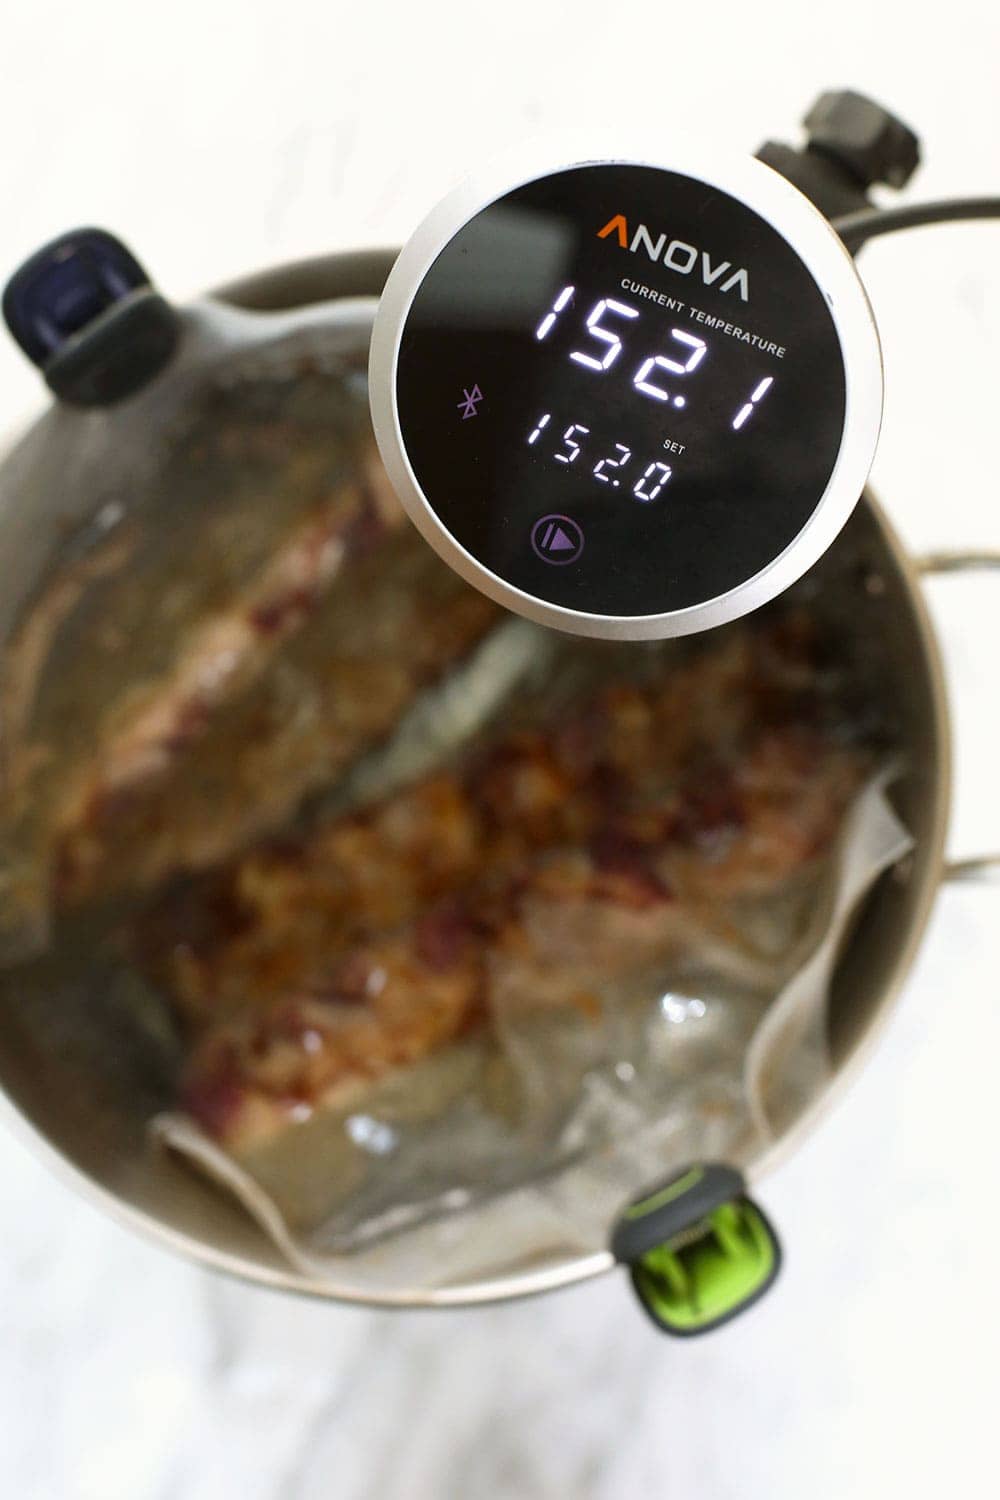 Ribs in a sous vide at 152.1ºF. 